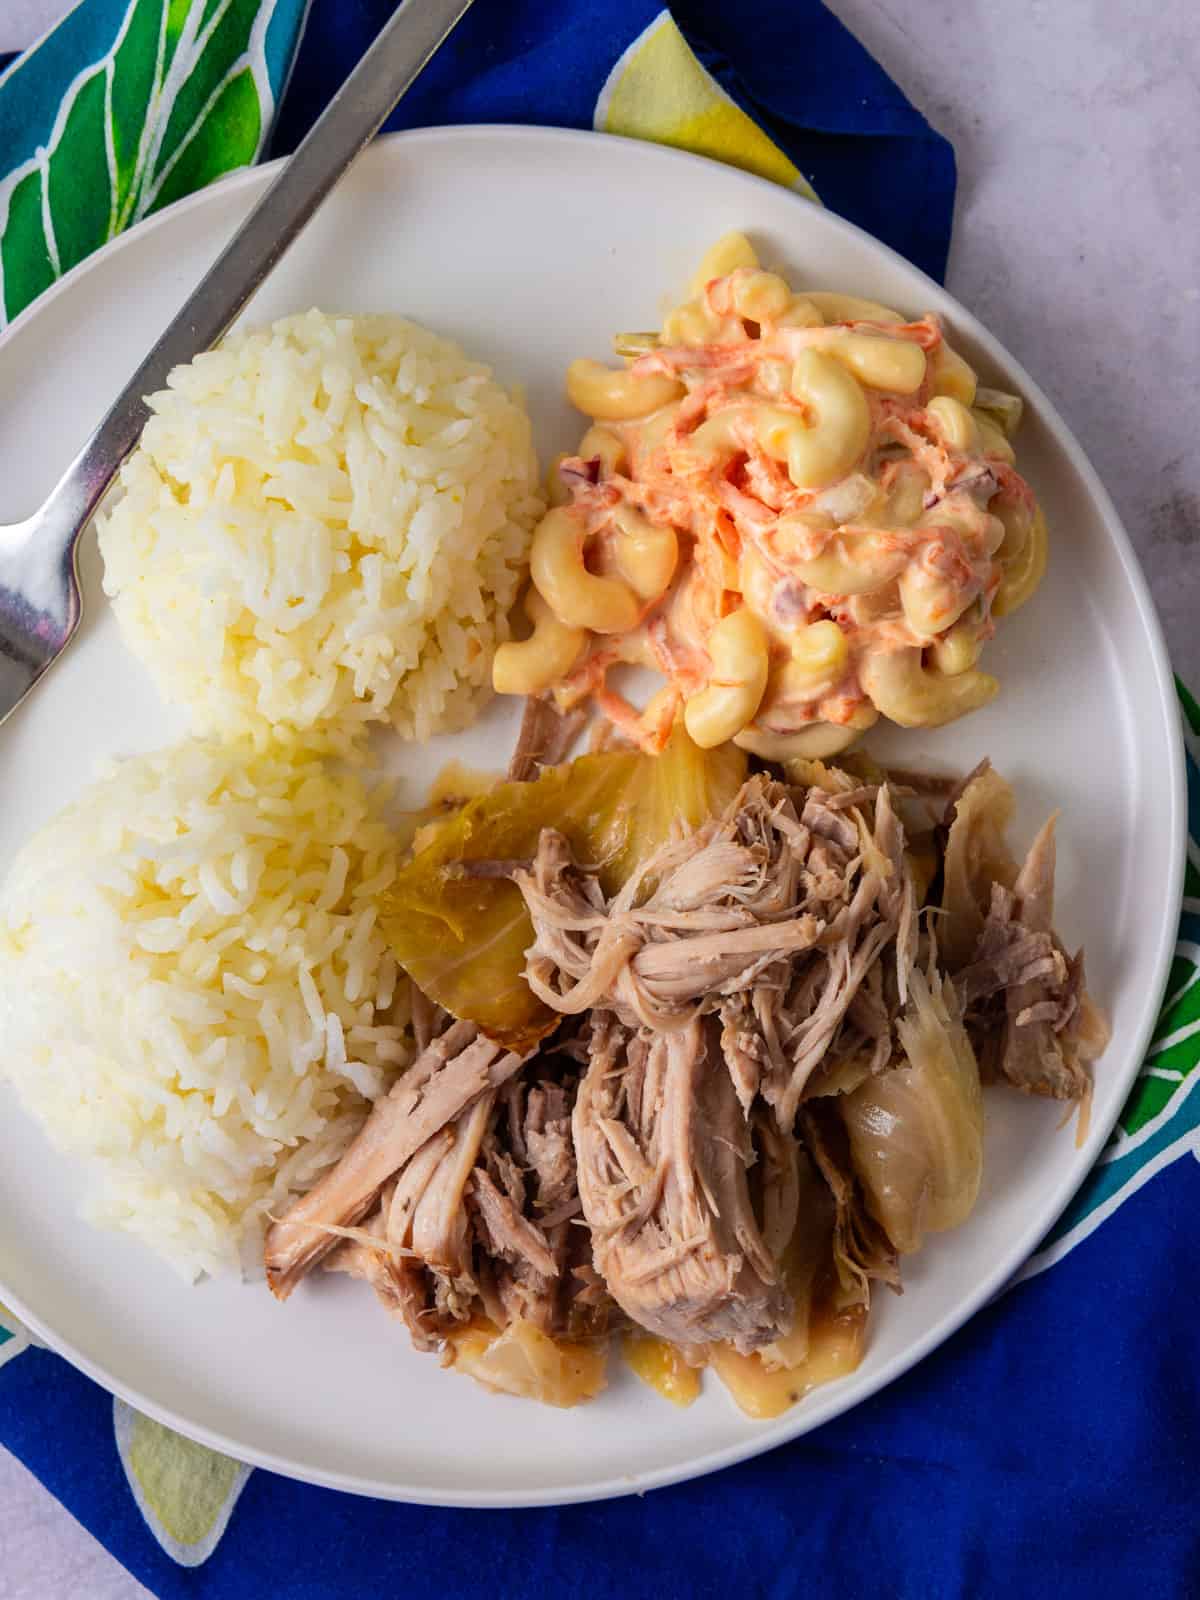 Kalua pork and cabbage plate lunch with mac salad and white rice.